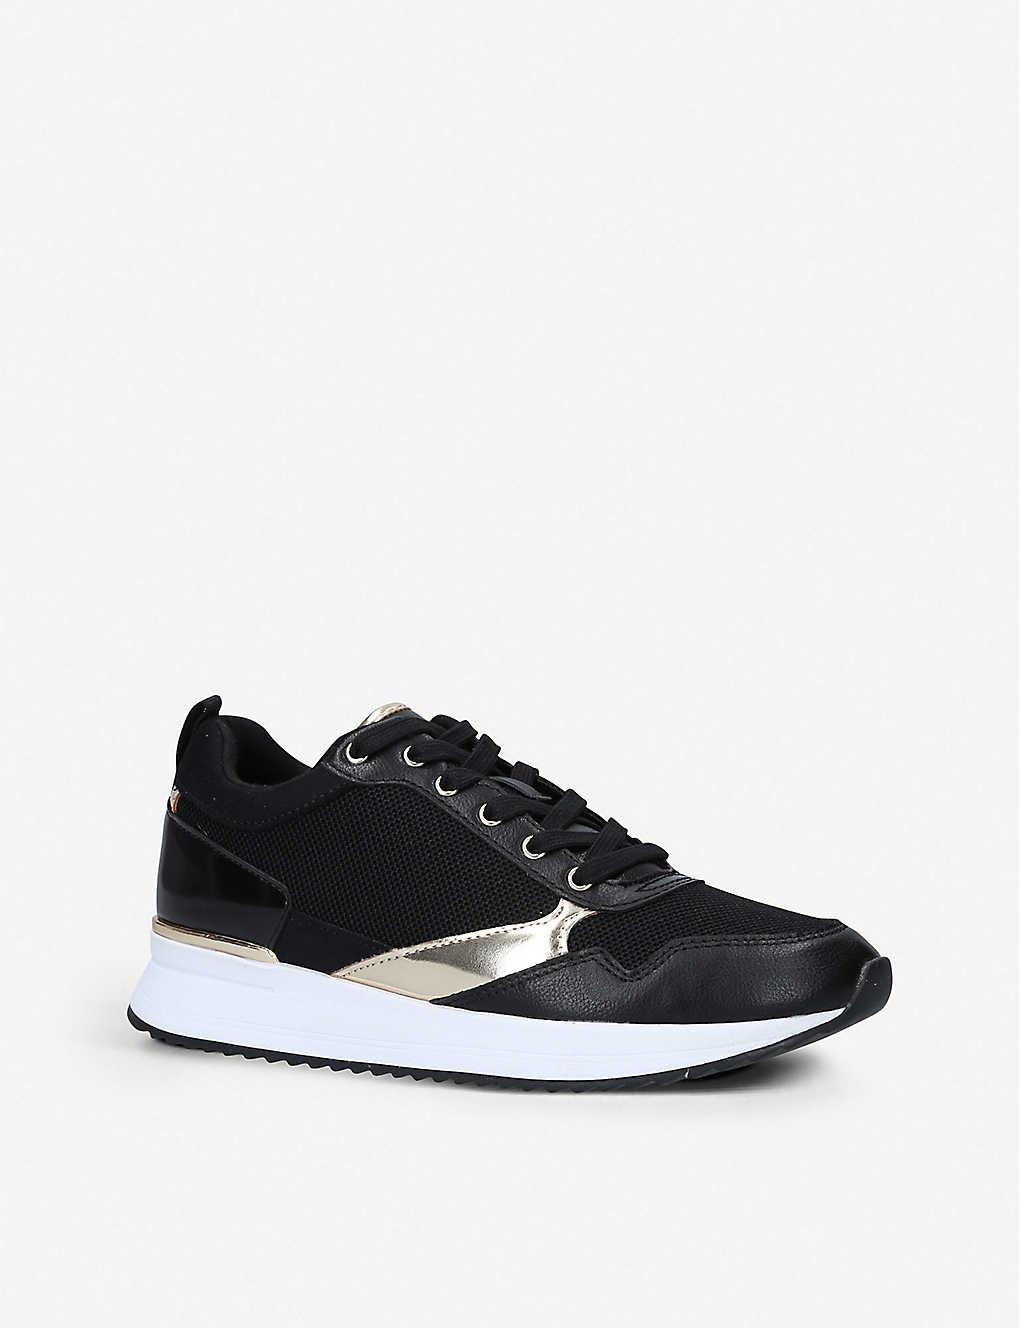 ALDO Genica Panelled Mesh Trainers in Black | Lyst